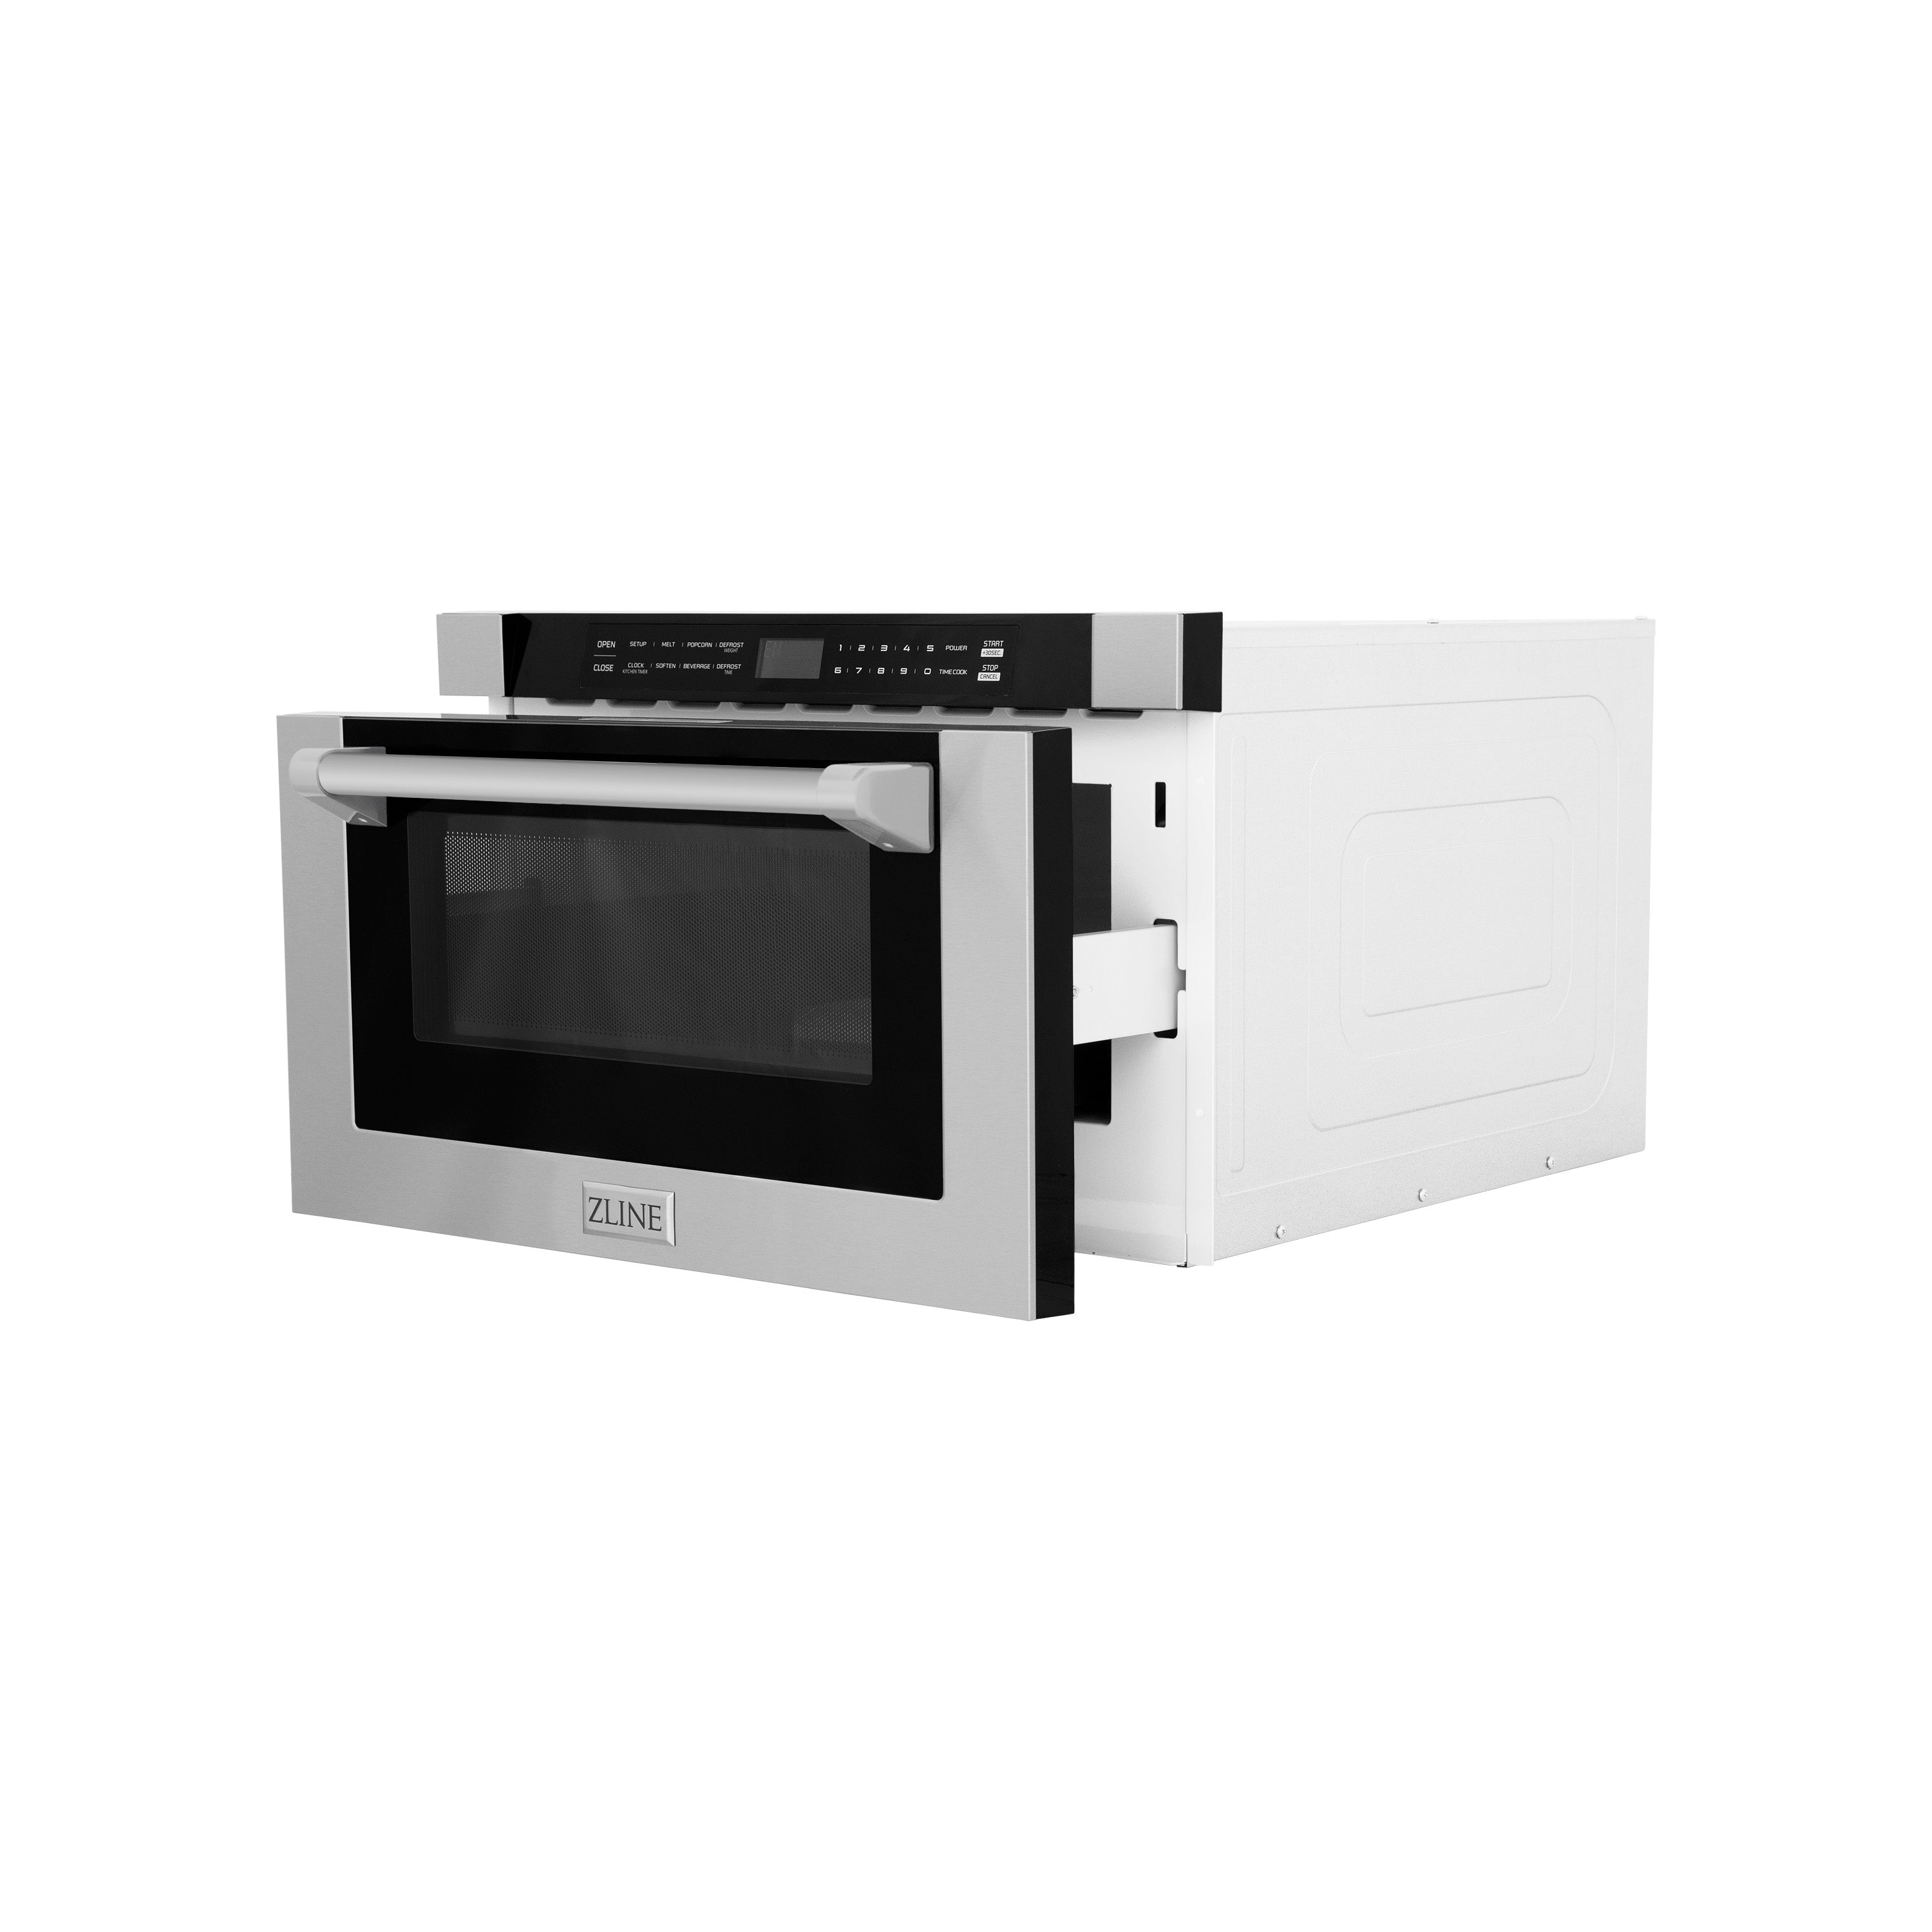 ZLINE 24" 1.2 cu. ft. Built-in Microwave Drawer with a Traditional Handle in Stainless Steel (MWD-1-H) - New Star Living